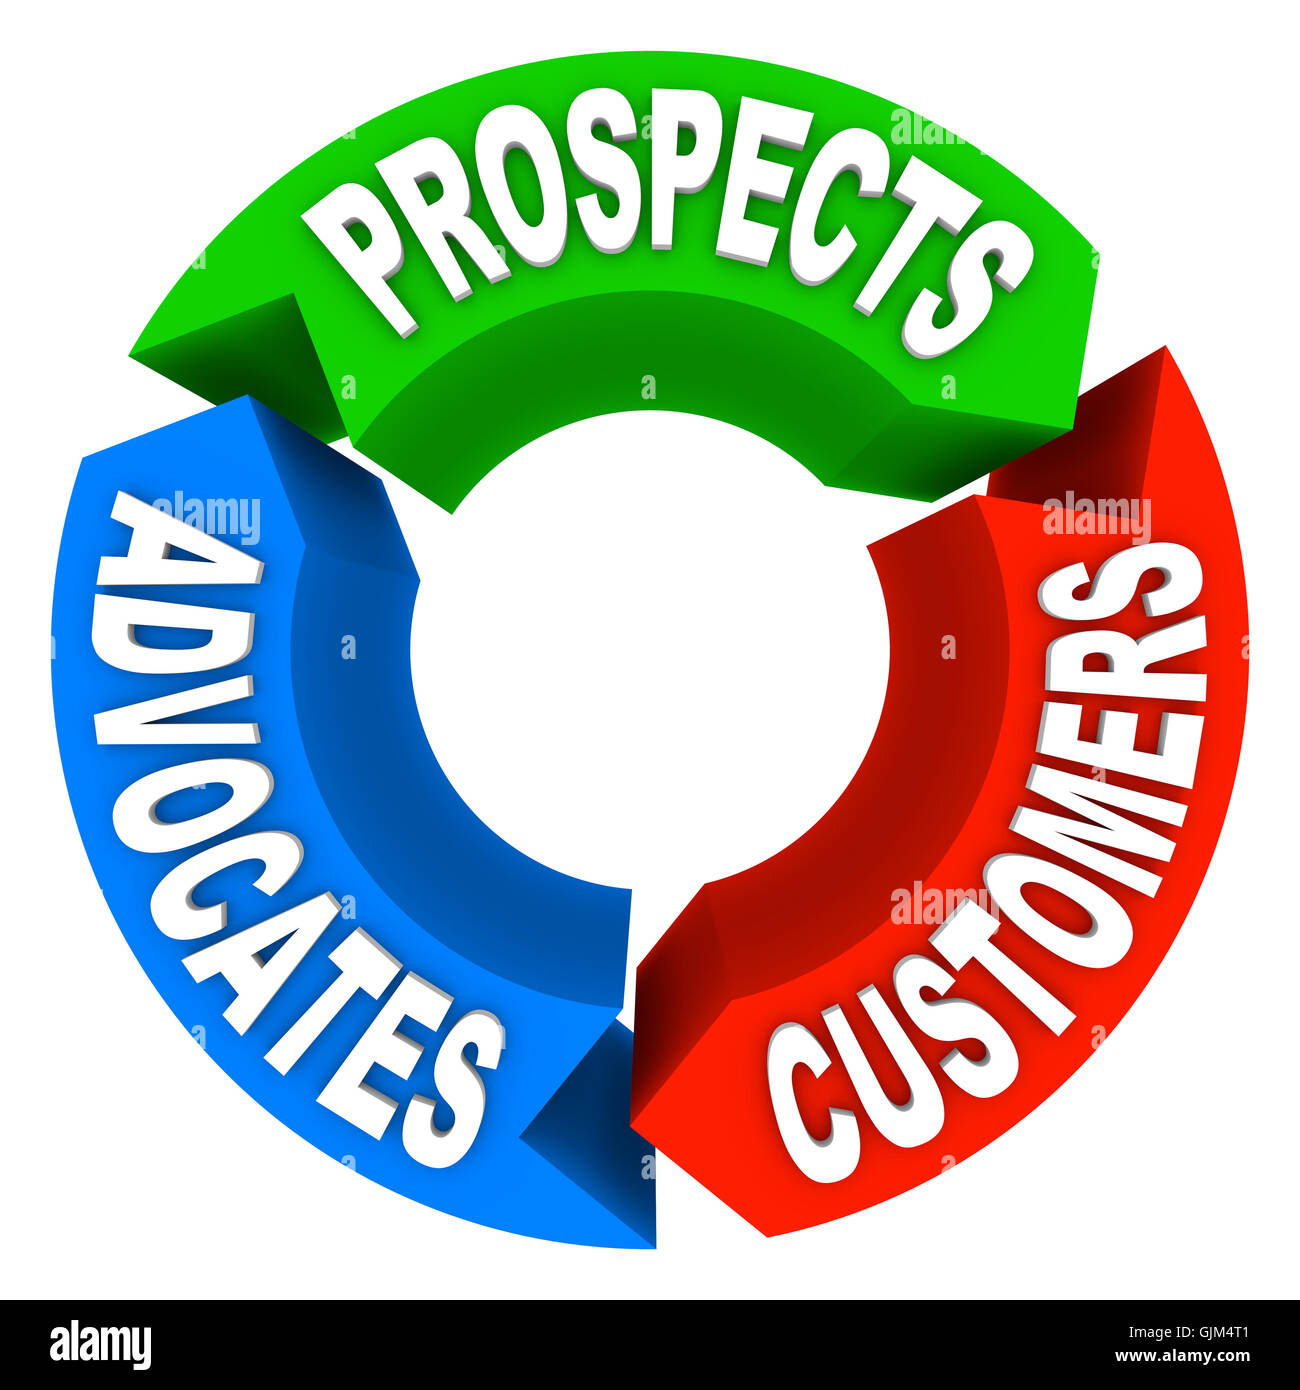 Customer Lifecycle - Converting Prospects to Customers to Advoca Stock Photo